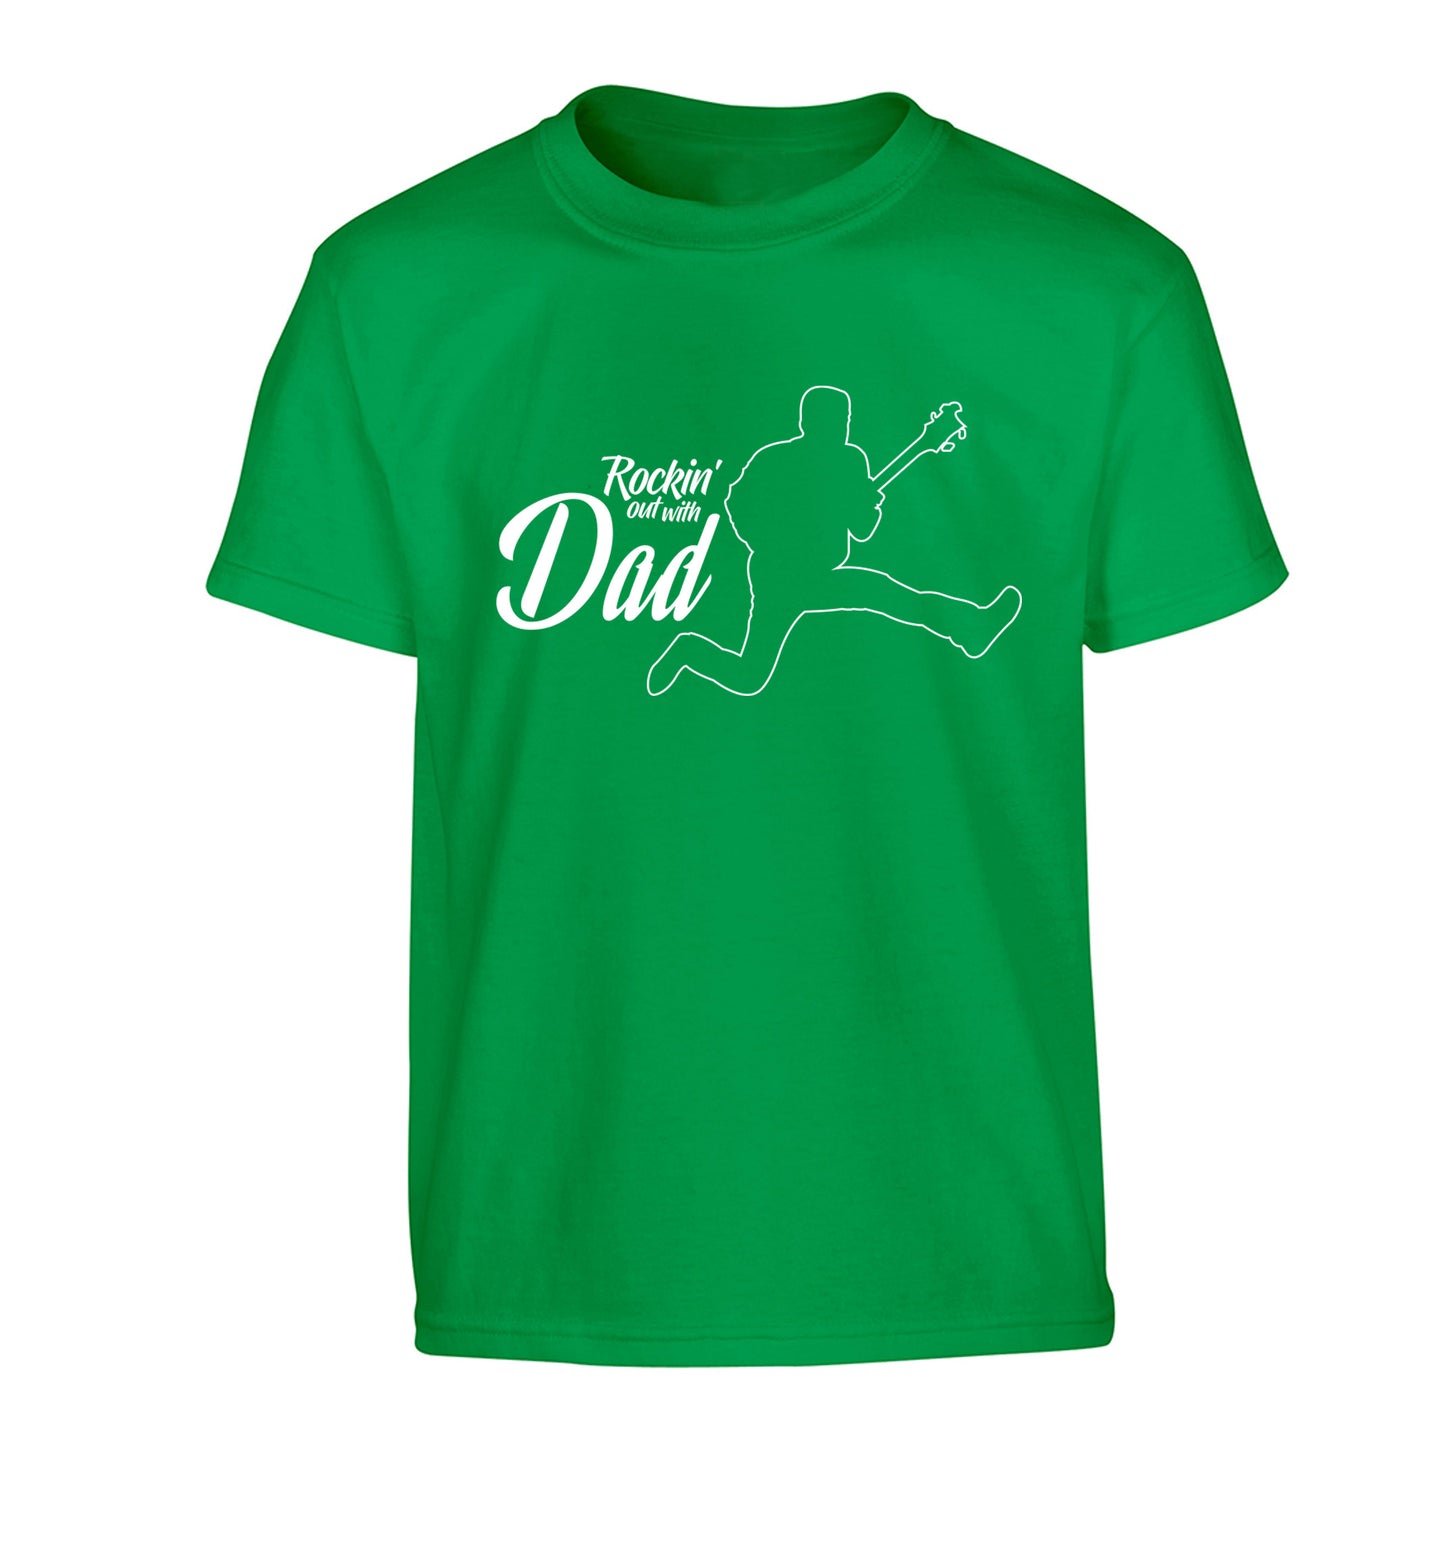 Rockin out with dad Children's green Tshirt 12-13 Years